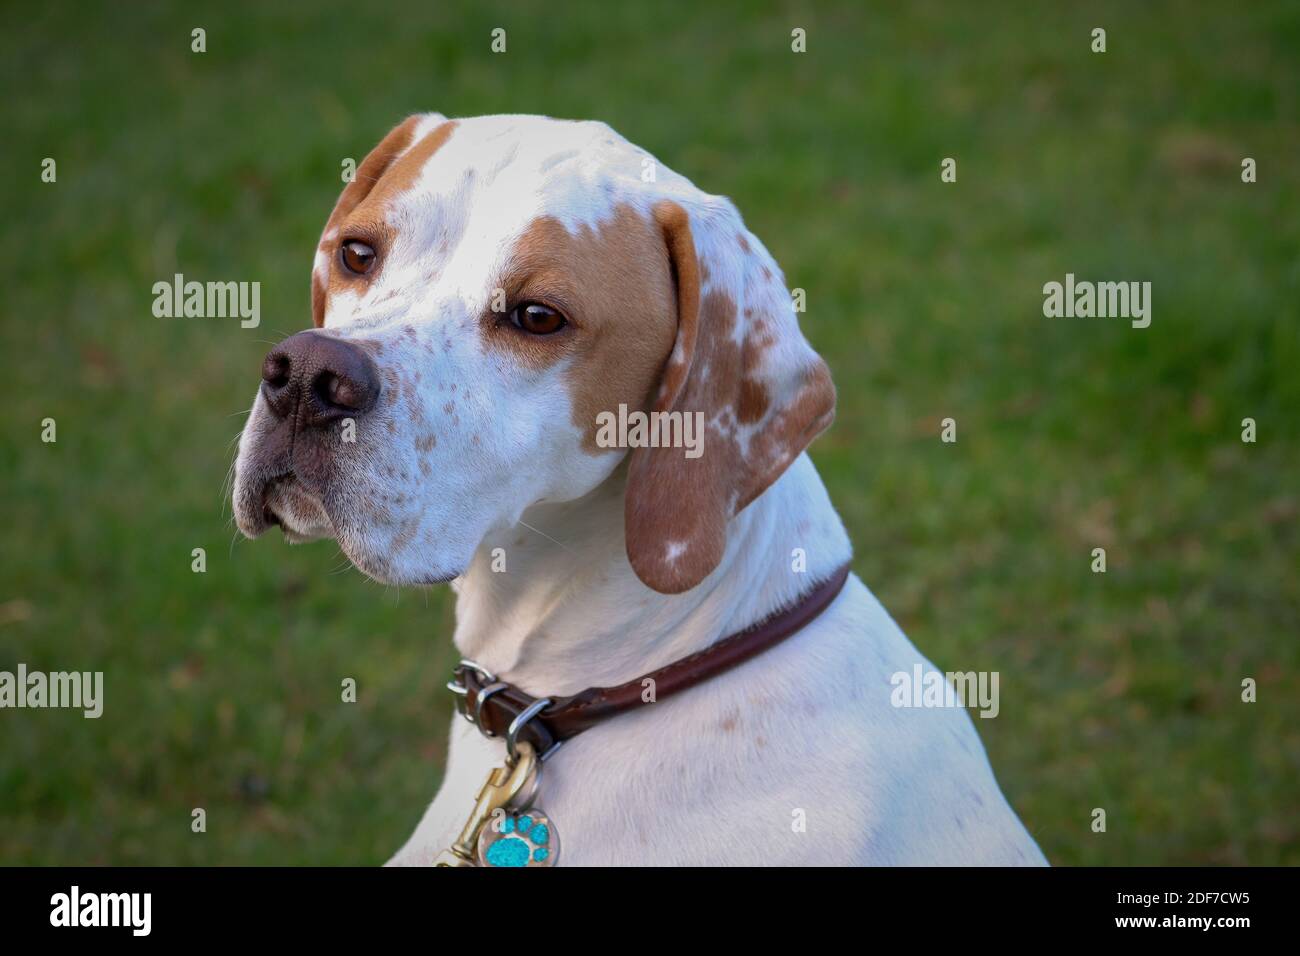 White and brown dog posing for a portrait Stock Photo